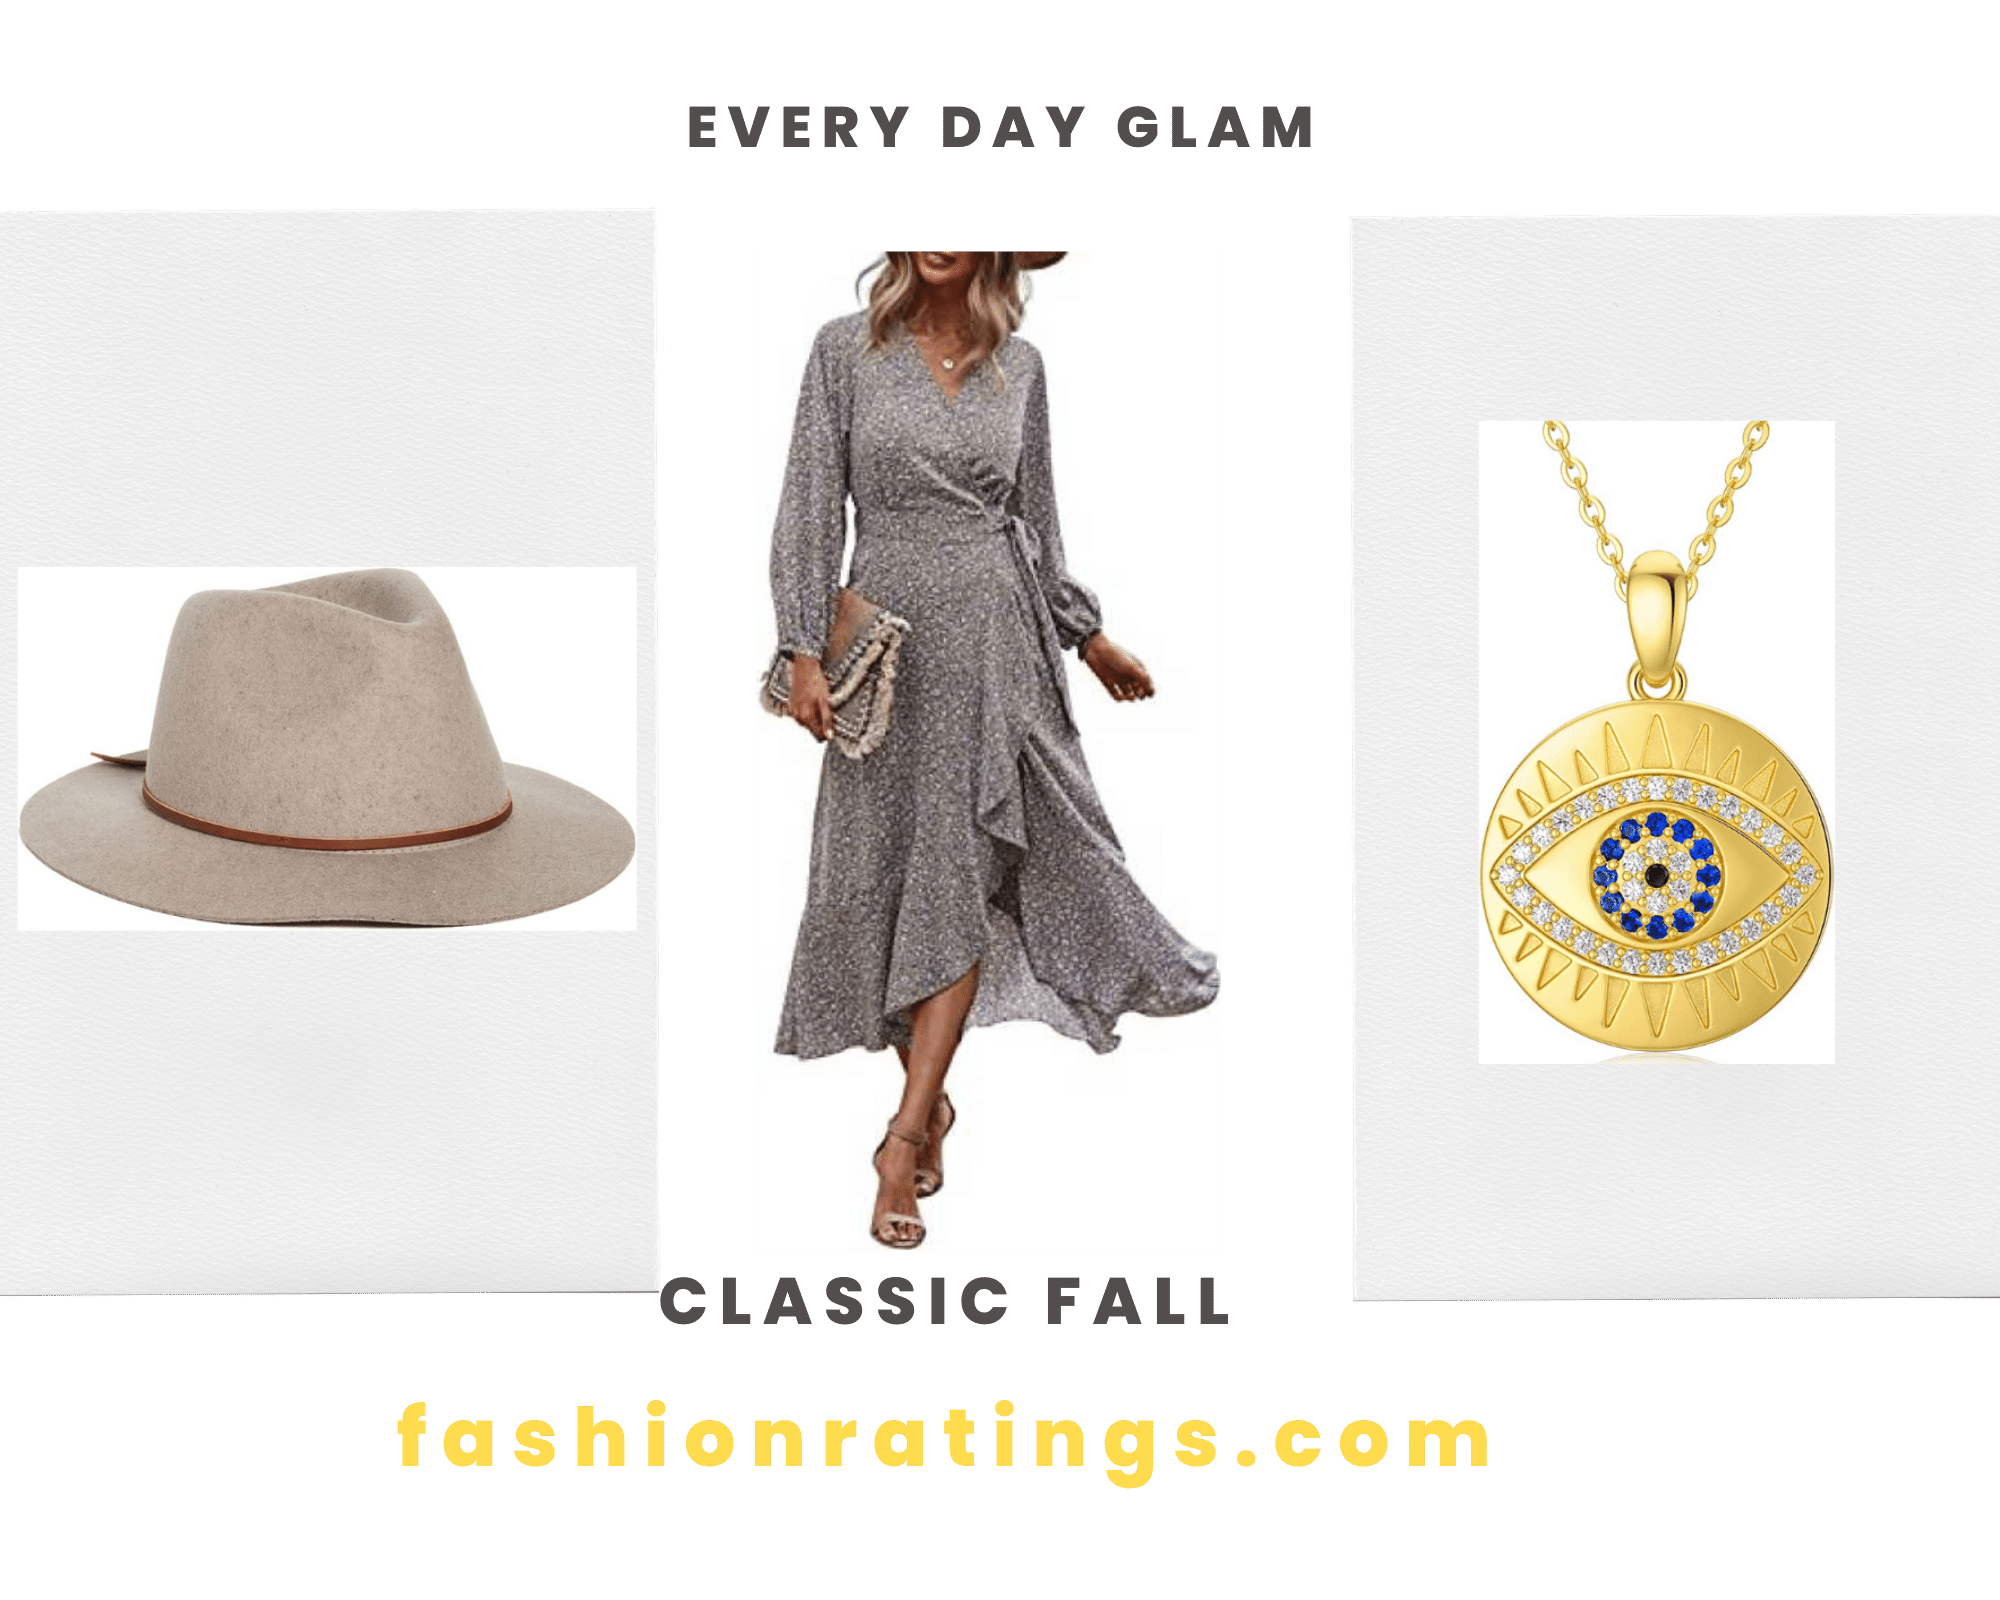 Fedora Dress and Necklace